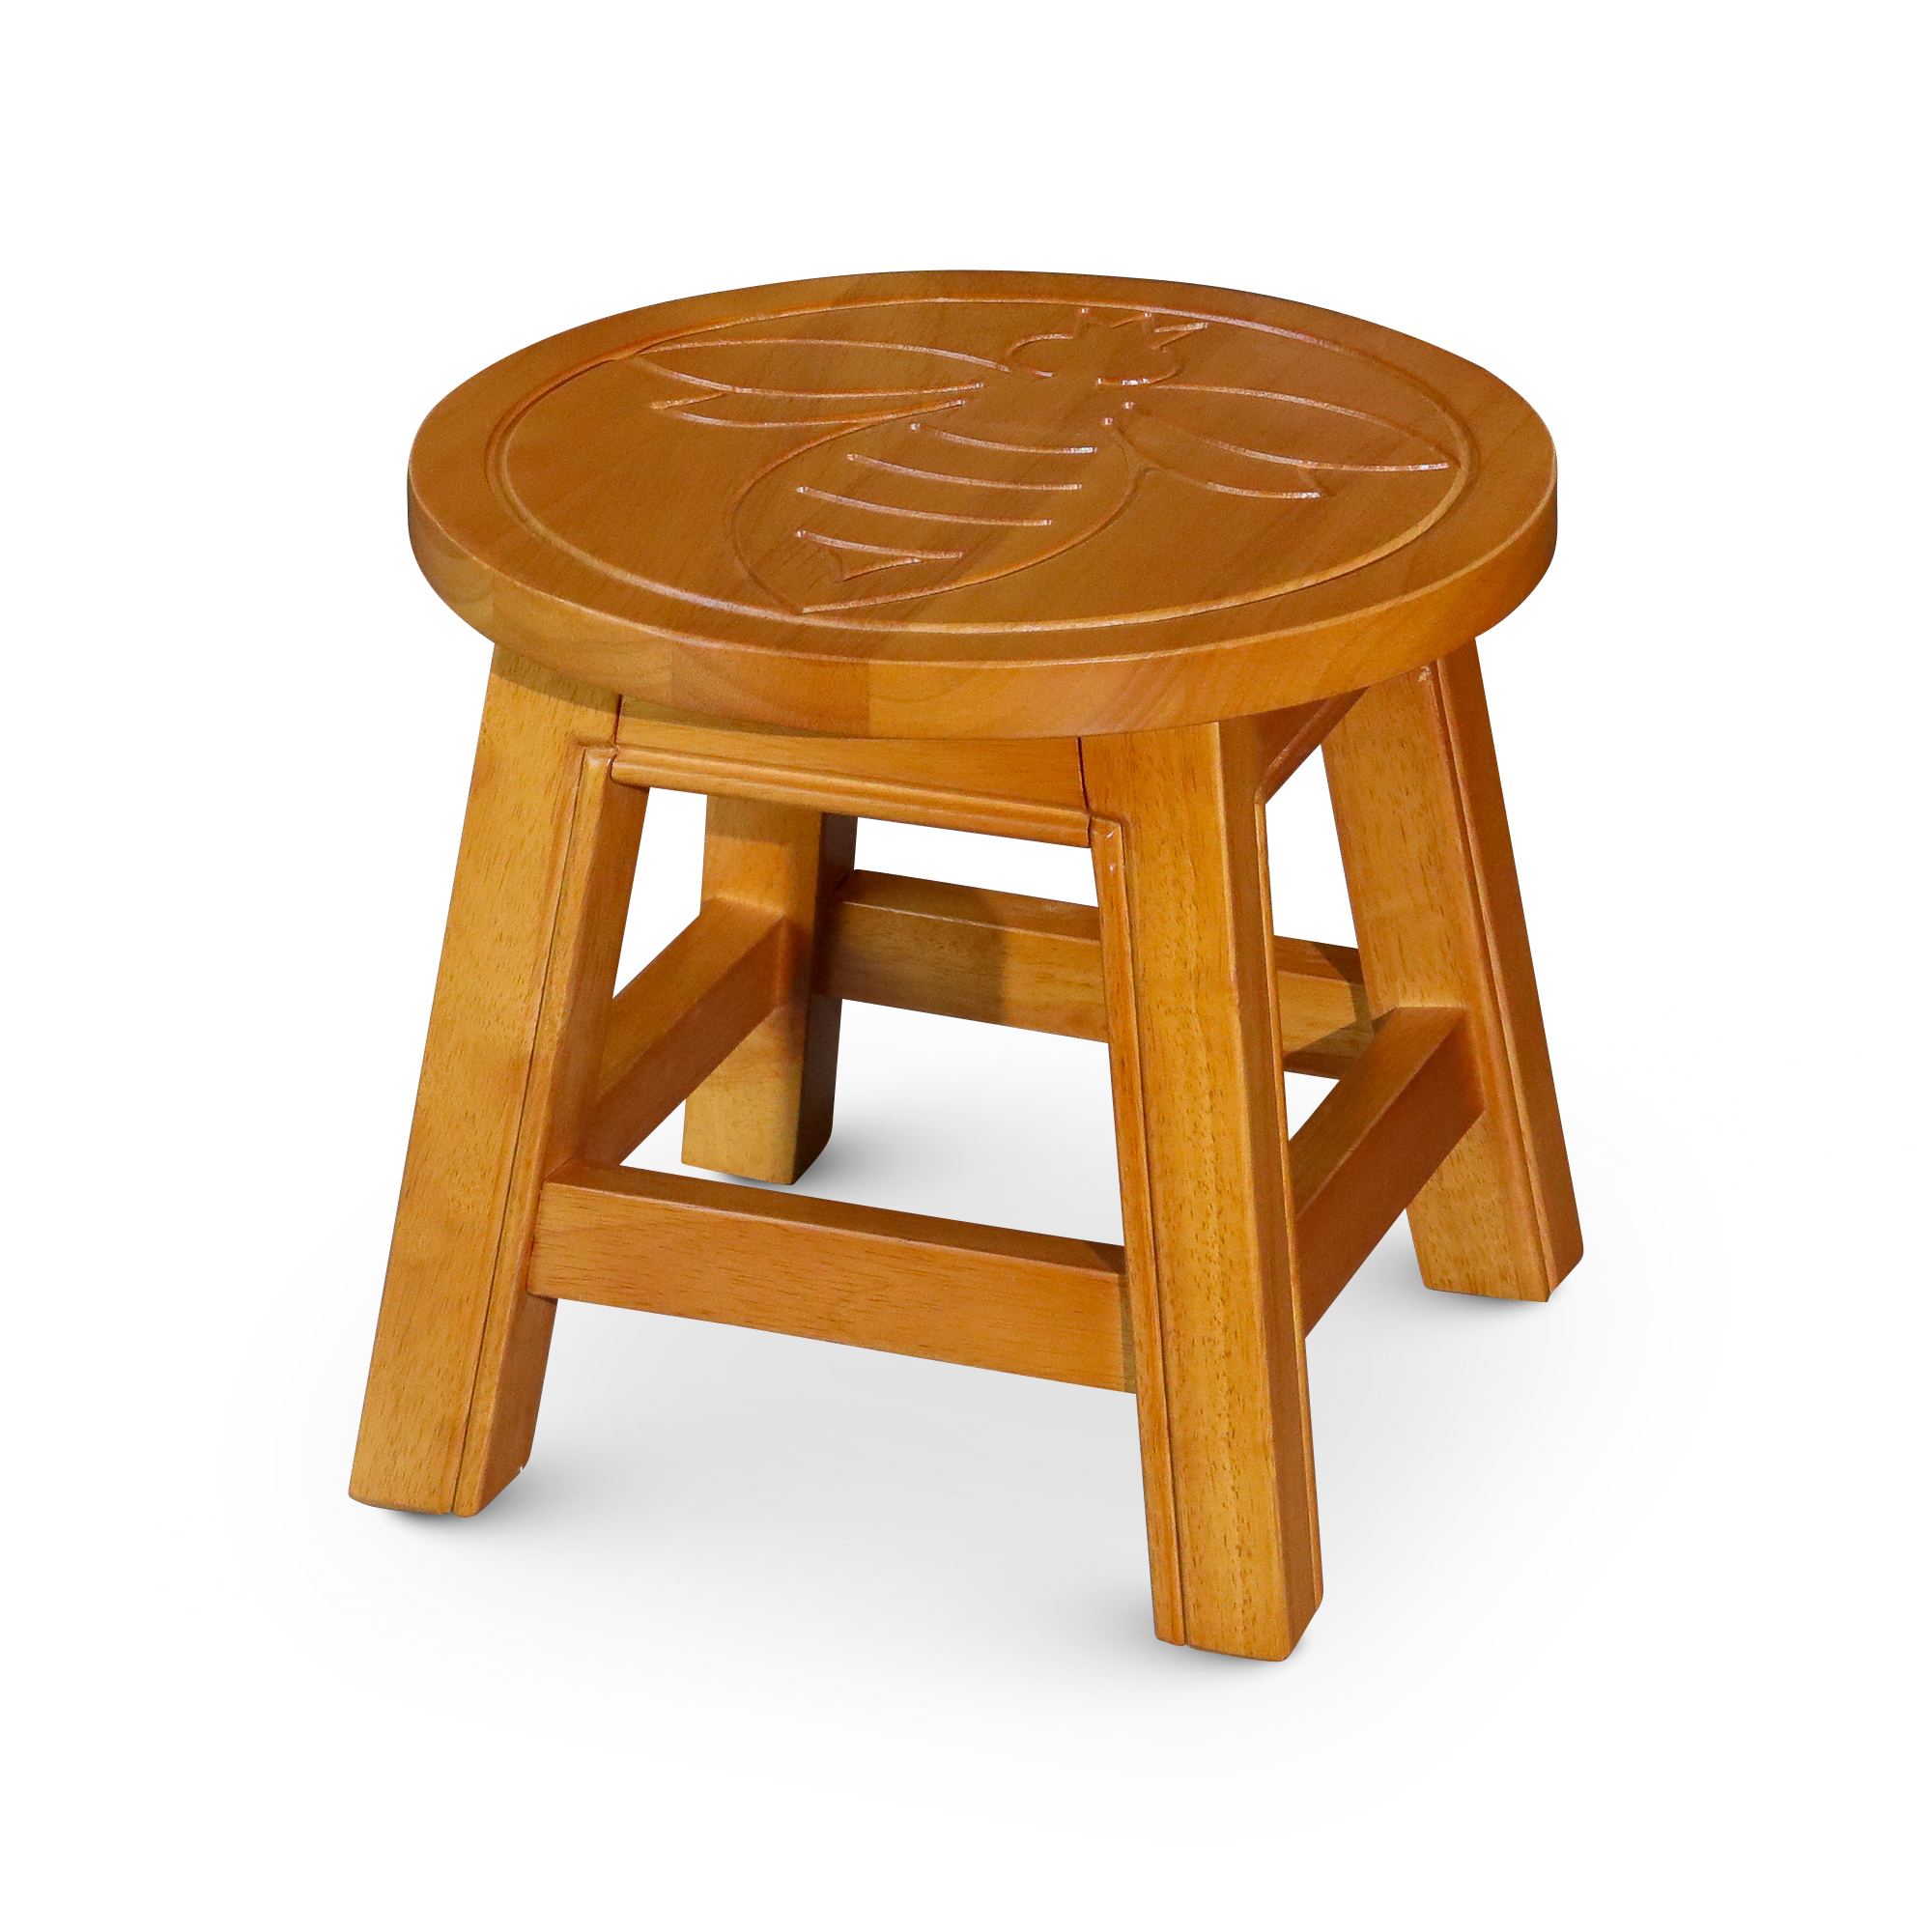 Carved Wooden Step Stool, Queen Bee, Natural